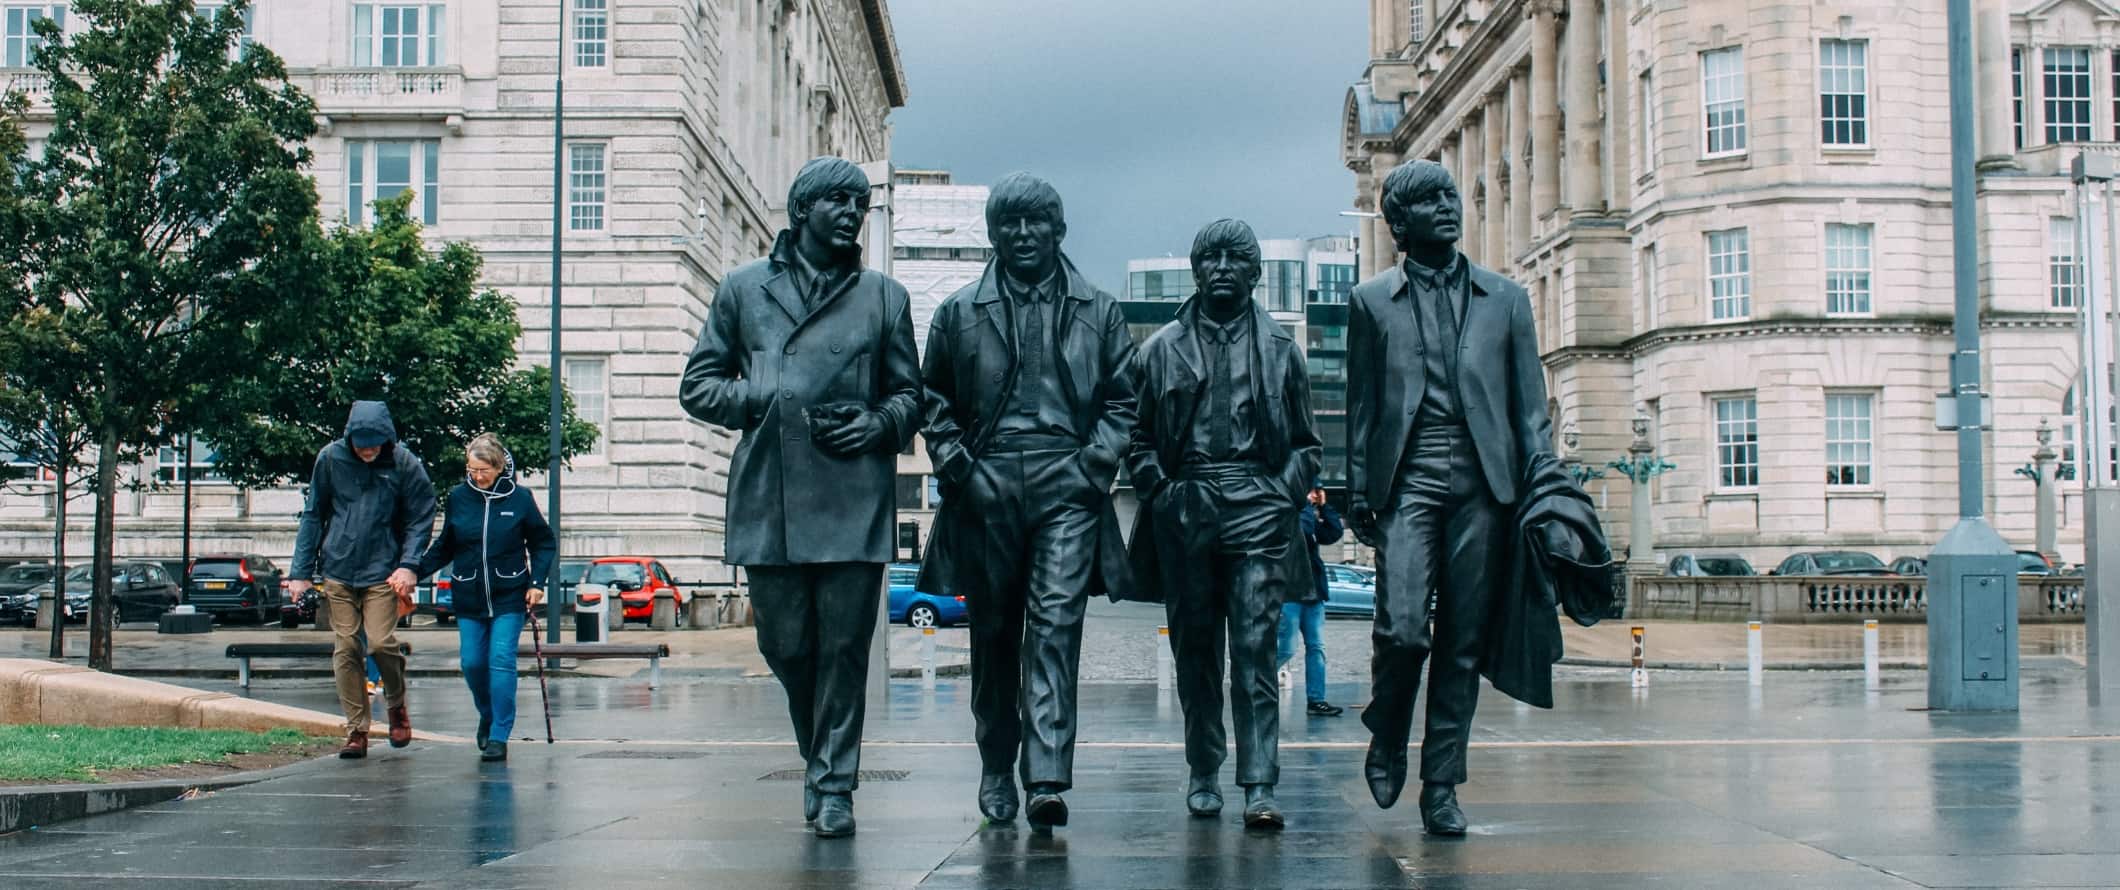 Life-size statue of the Beatles walking down the street in Liverpool, England